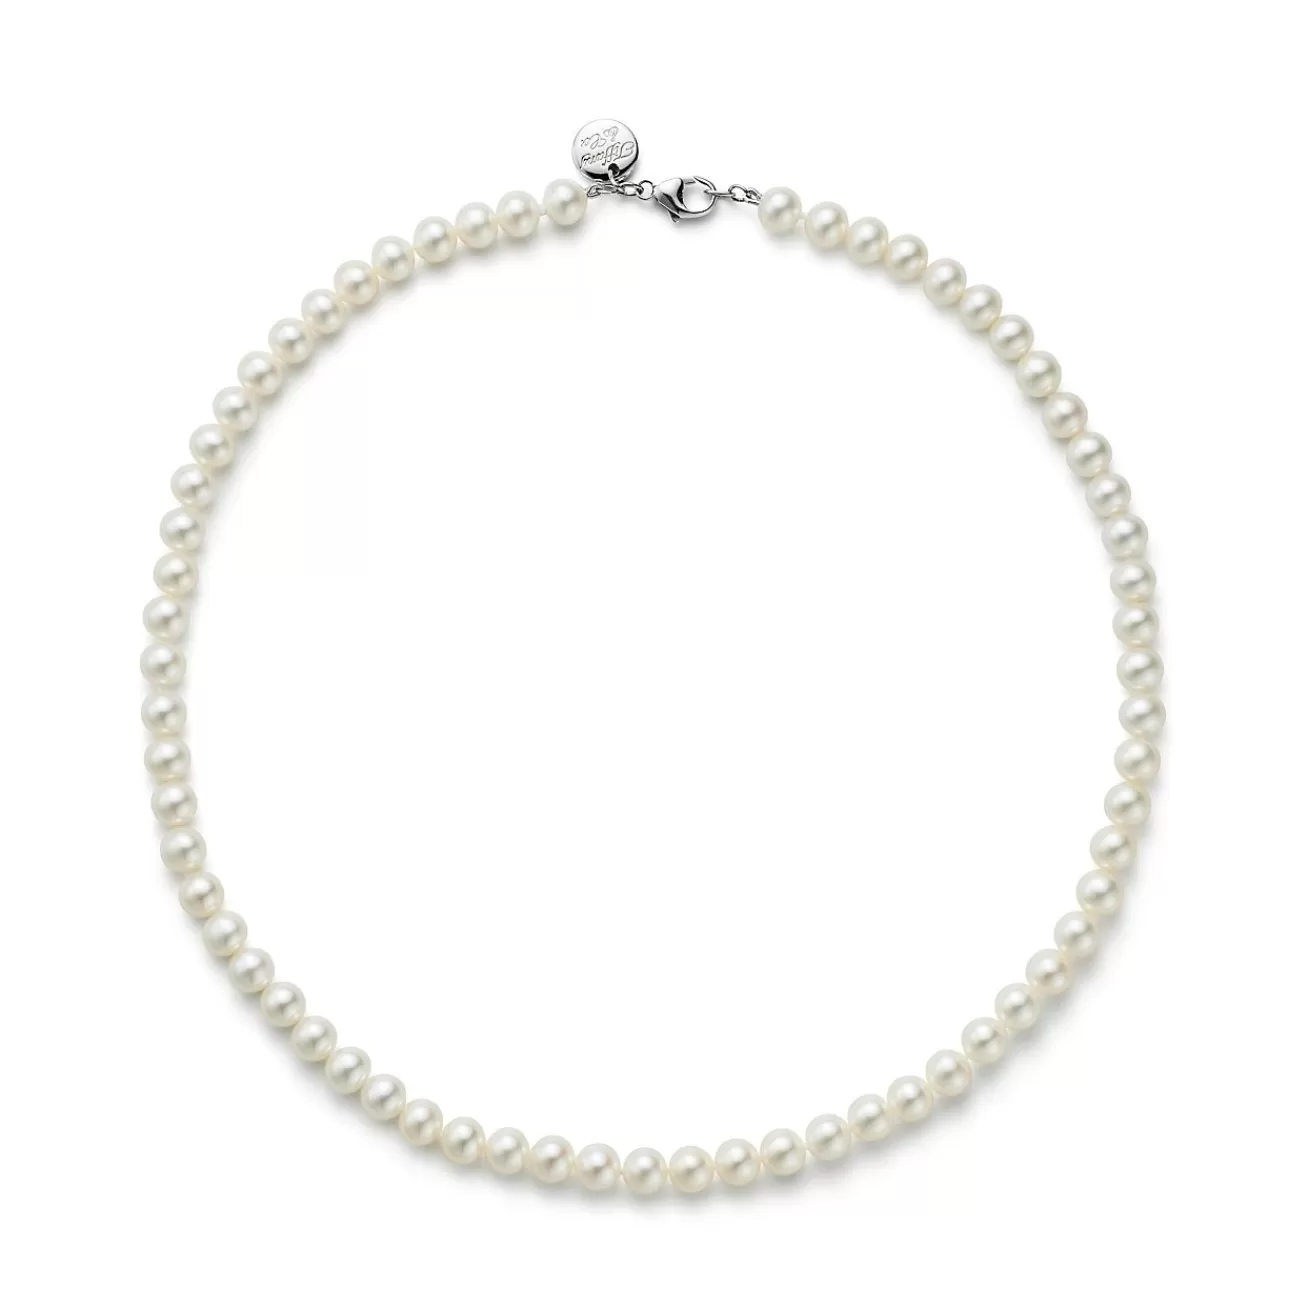 Tiffany & Co. Ziegfeld Collection pearl necklace with a silver clasp and decorative tag, 8-9 mm. | ^ Necklaces & Pendants